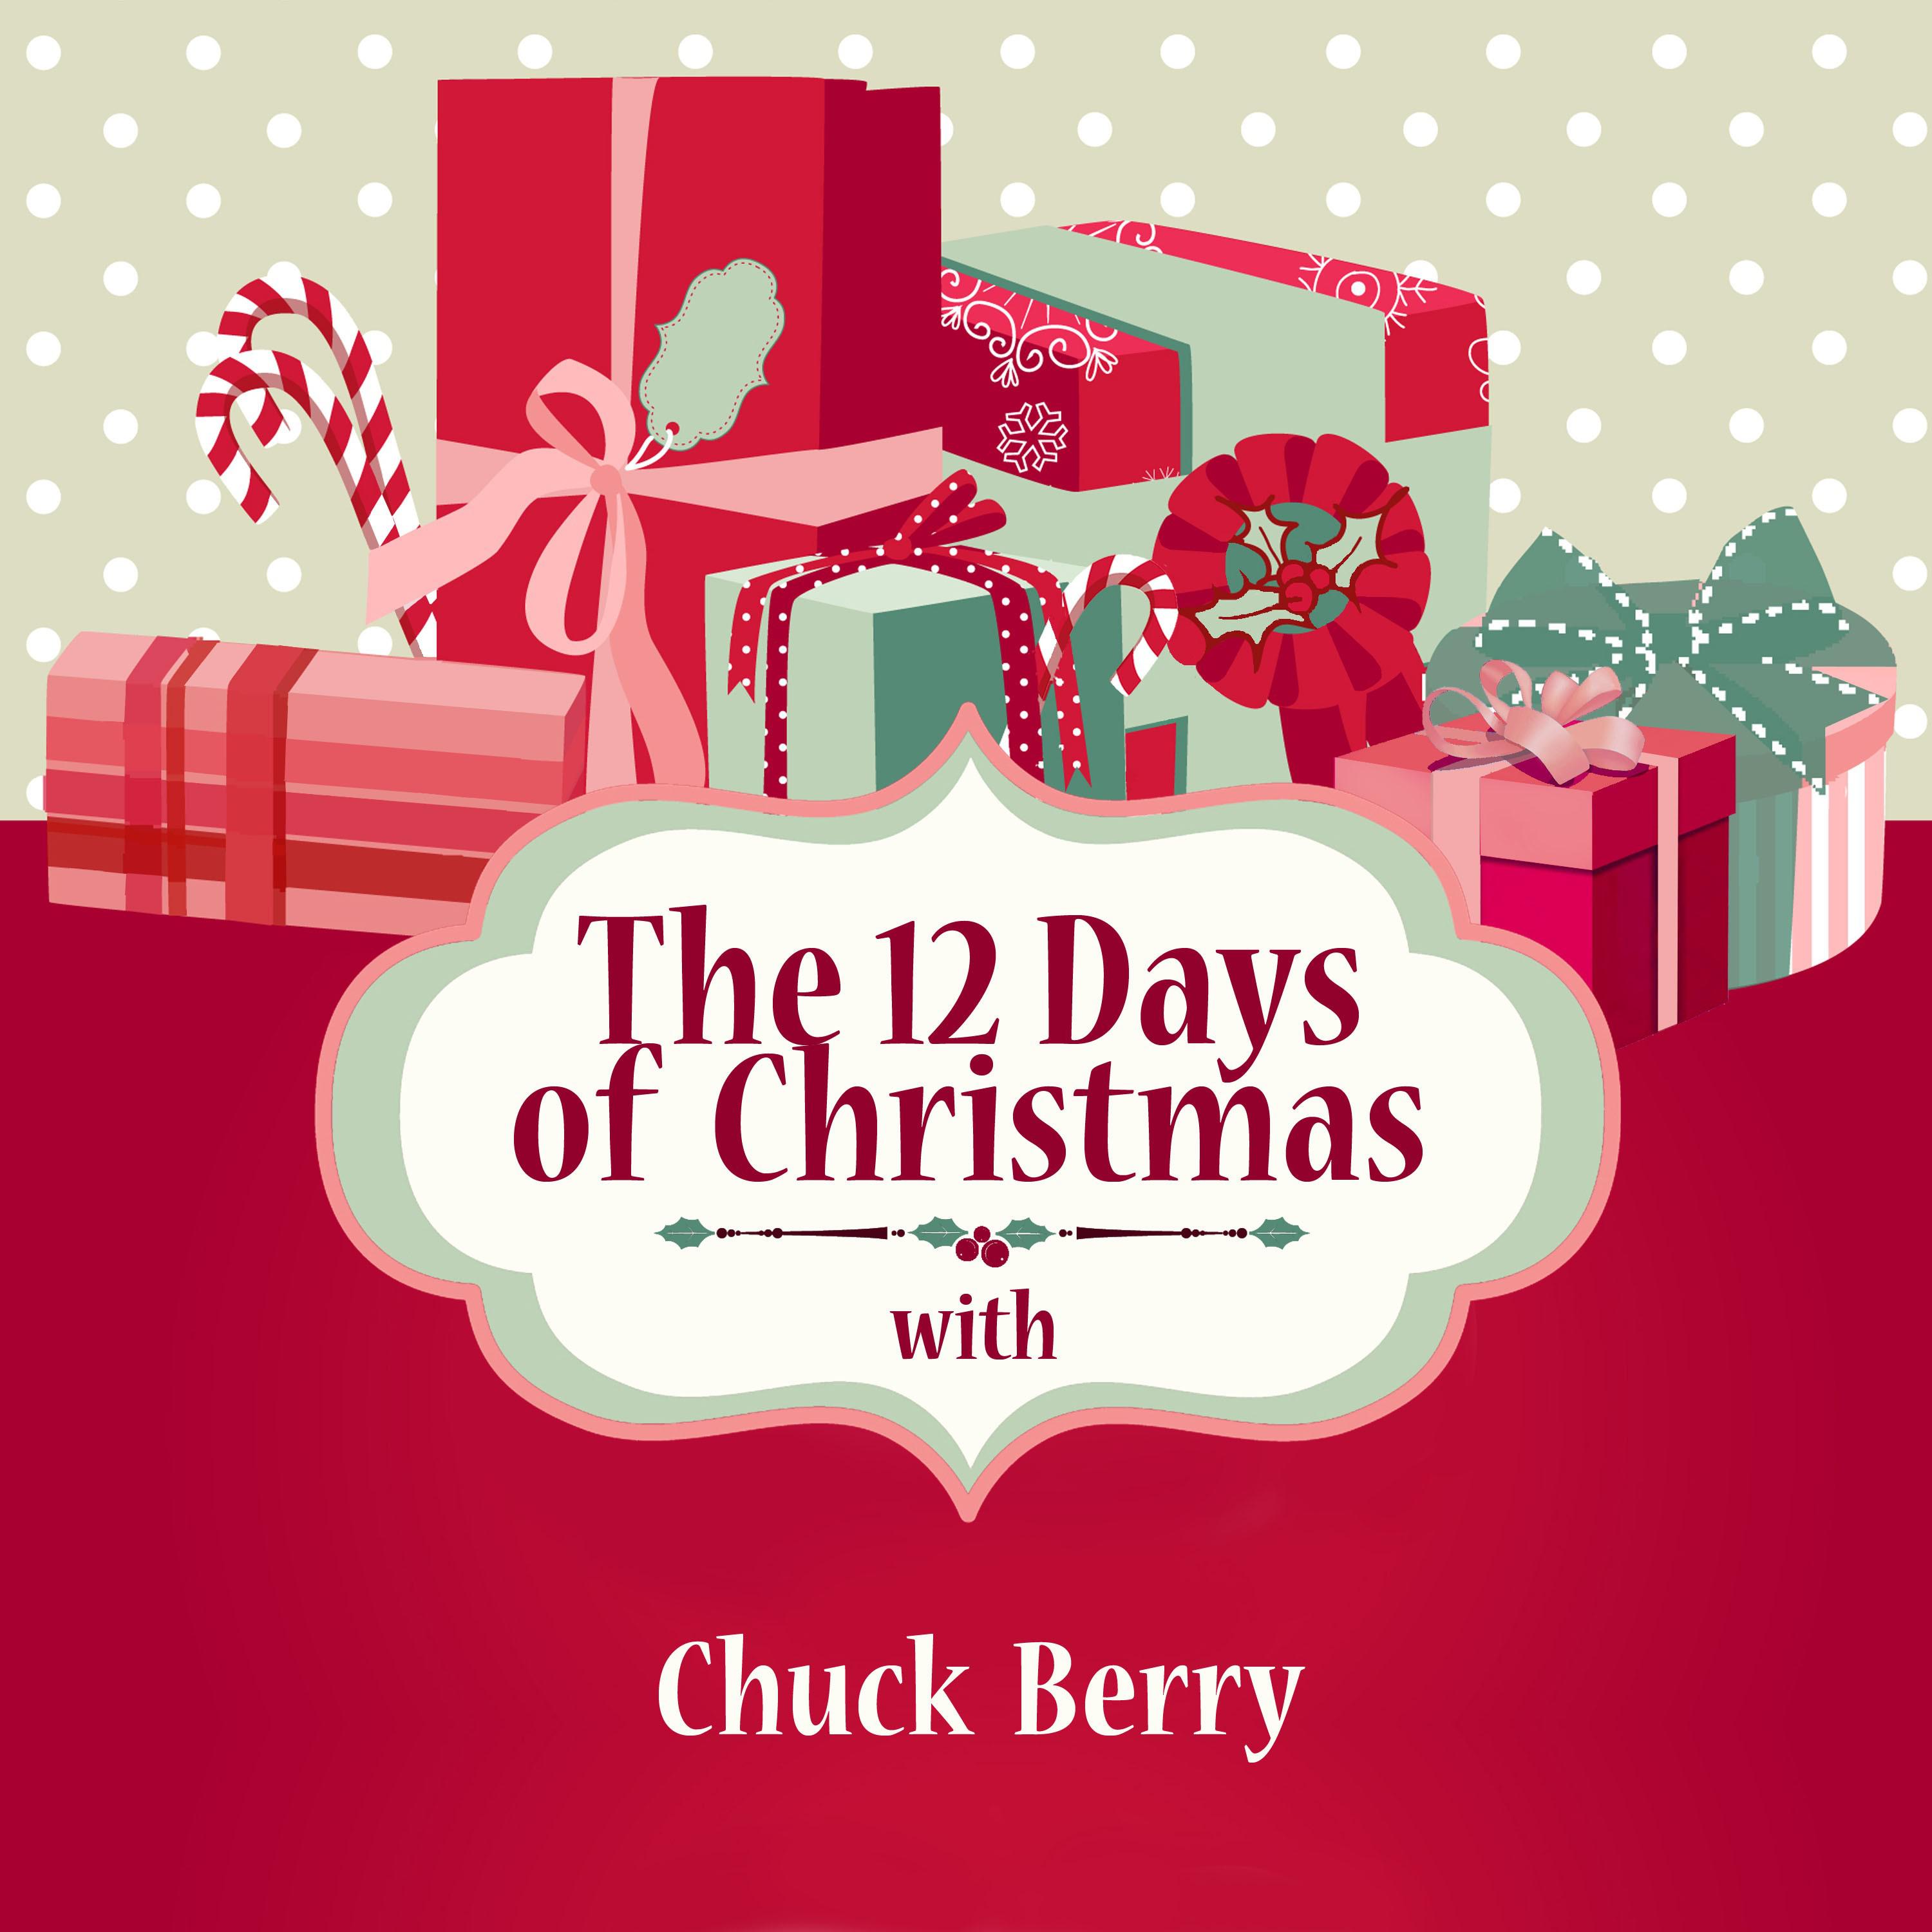 The 12 Days of Christmas with Chuck Berry